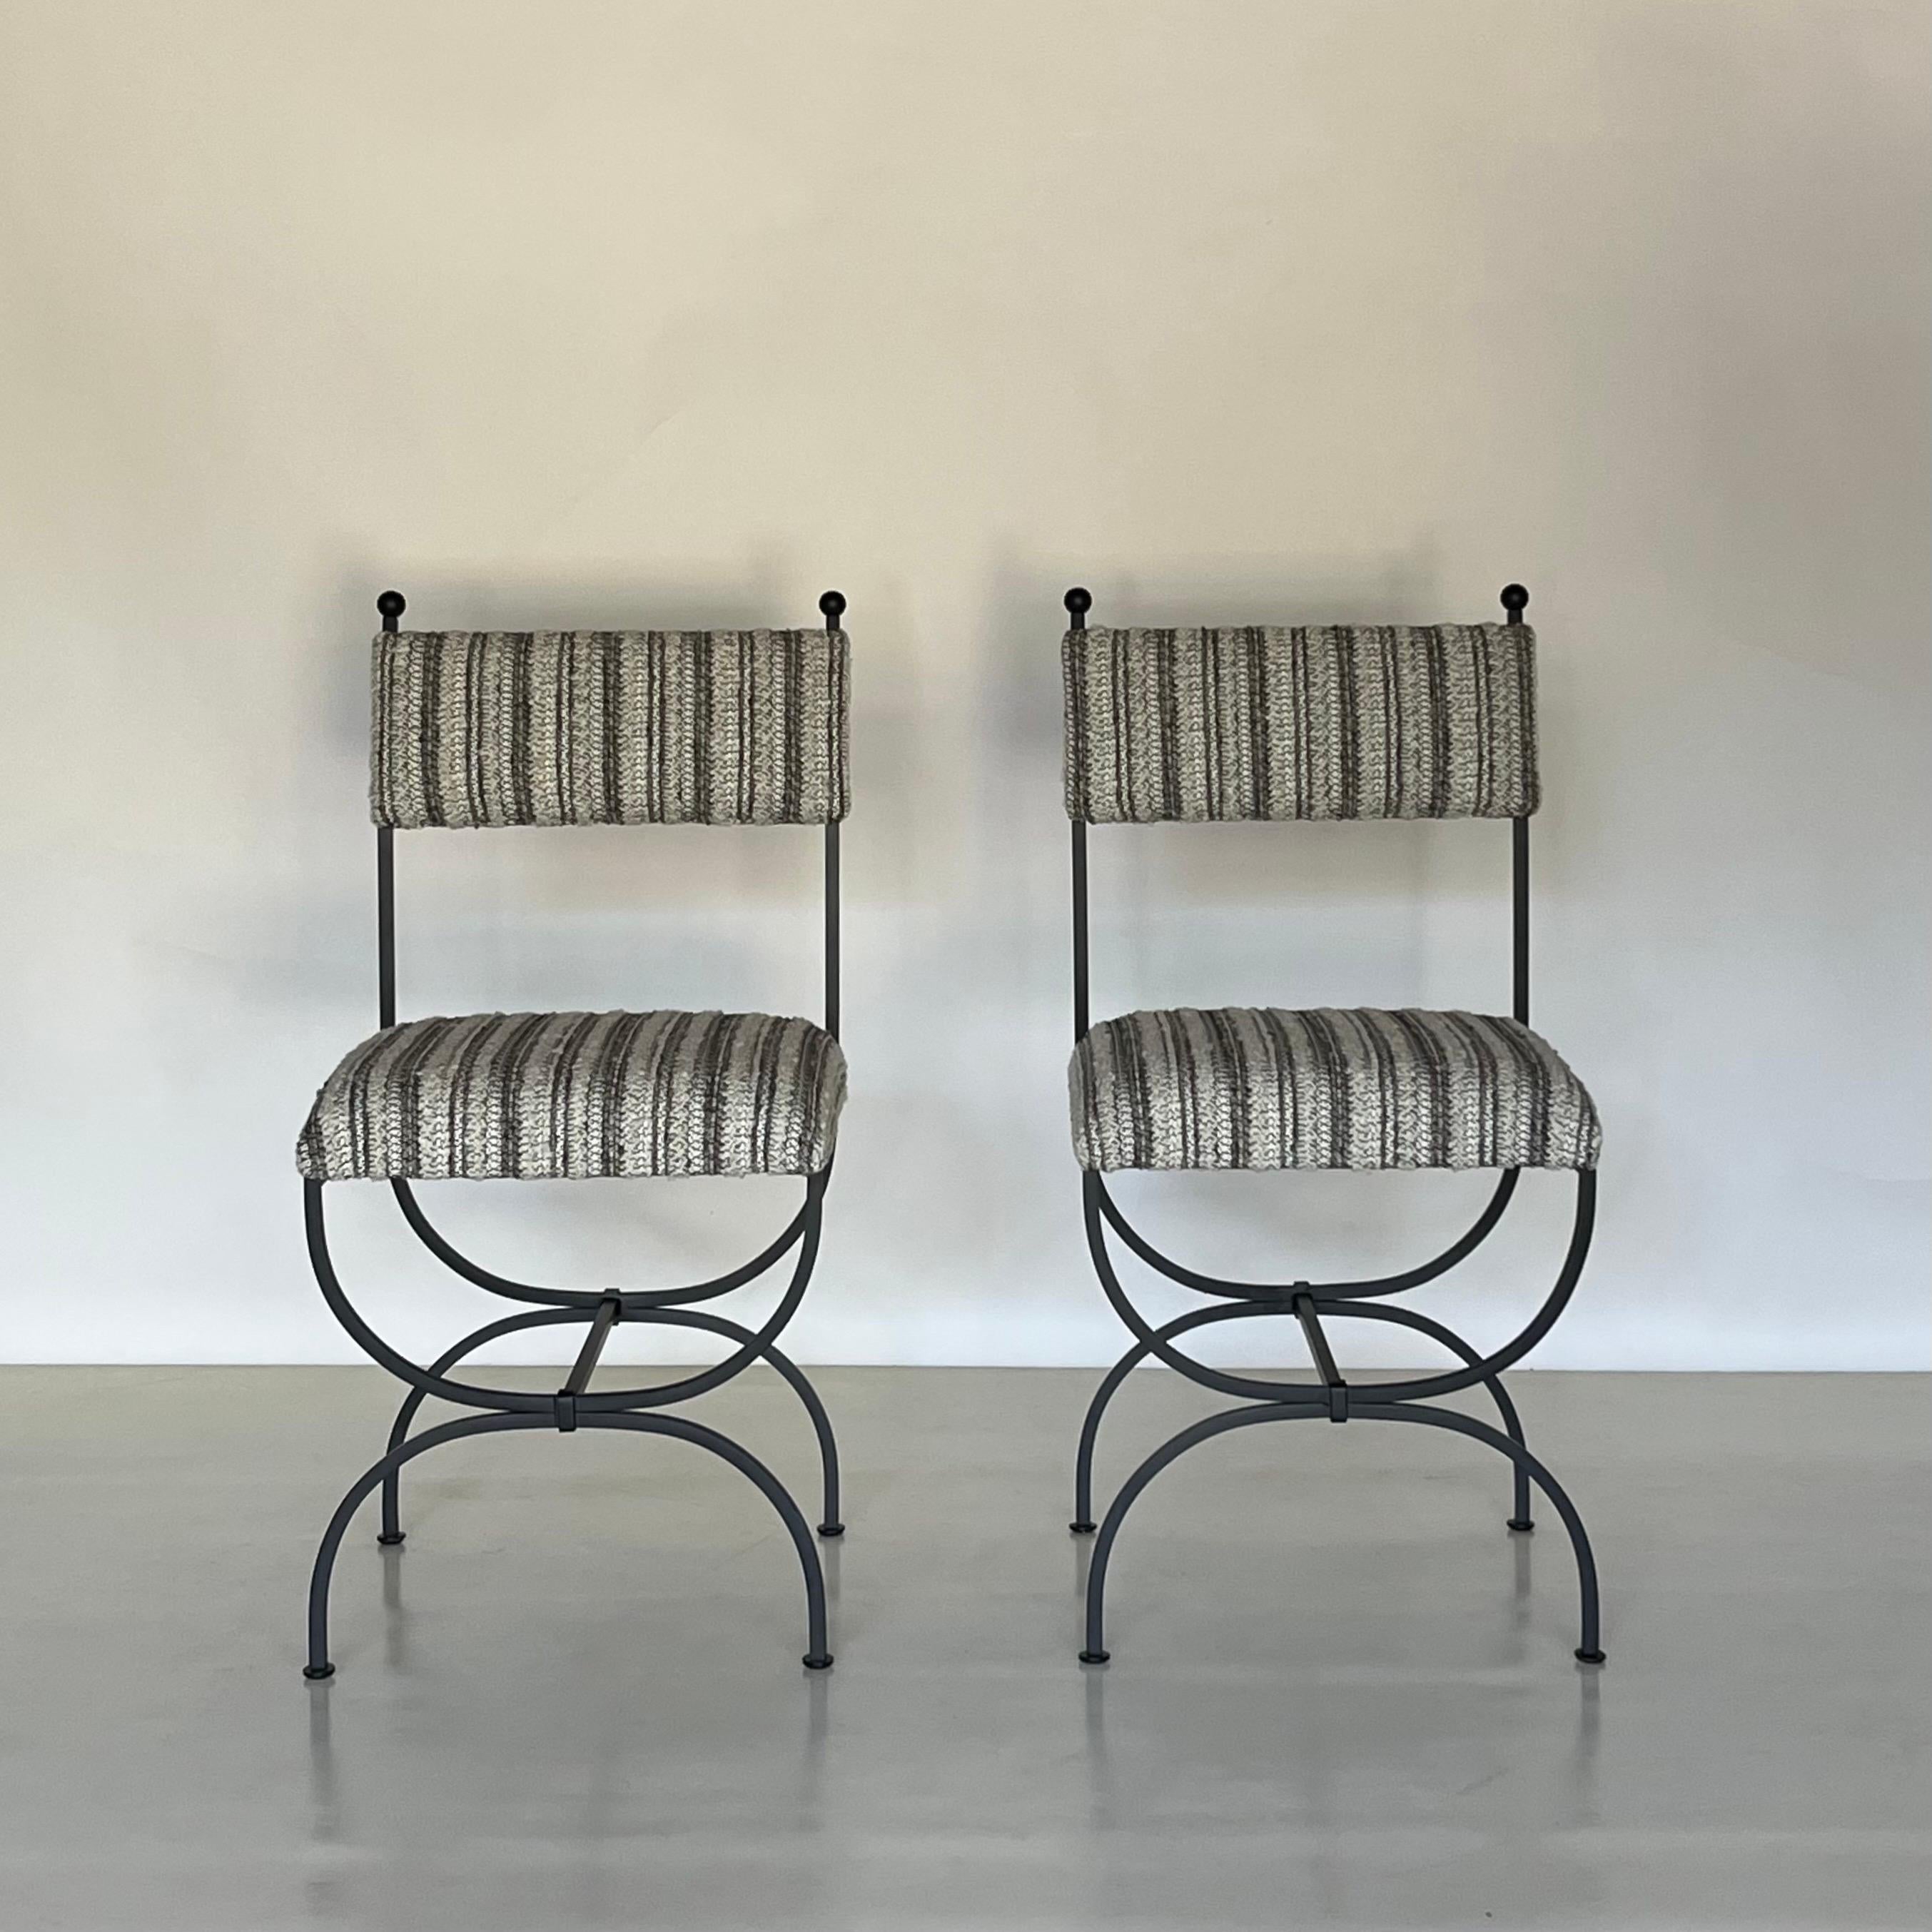 Pair of Arcade side chairs by Design Frères, in COM (not included: please send 4 yards for the pair of chairs to our workroom after your order is confirmed).